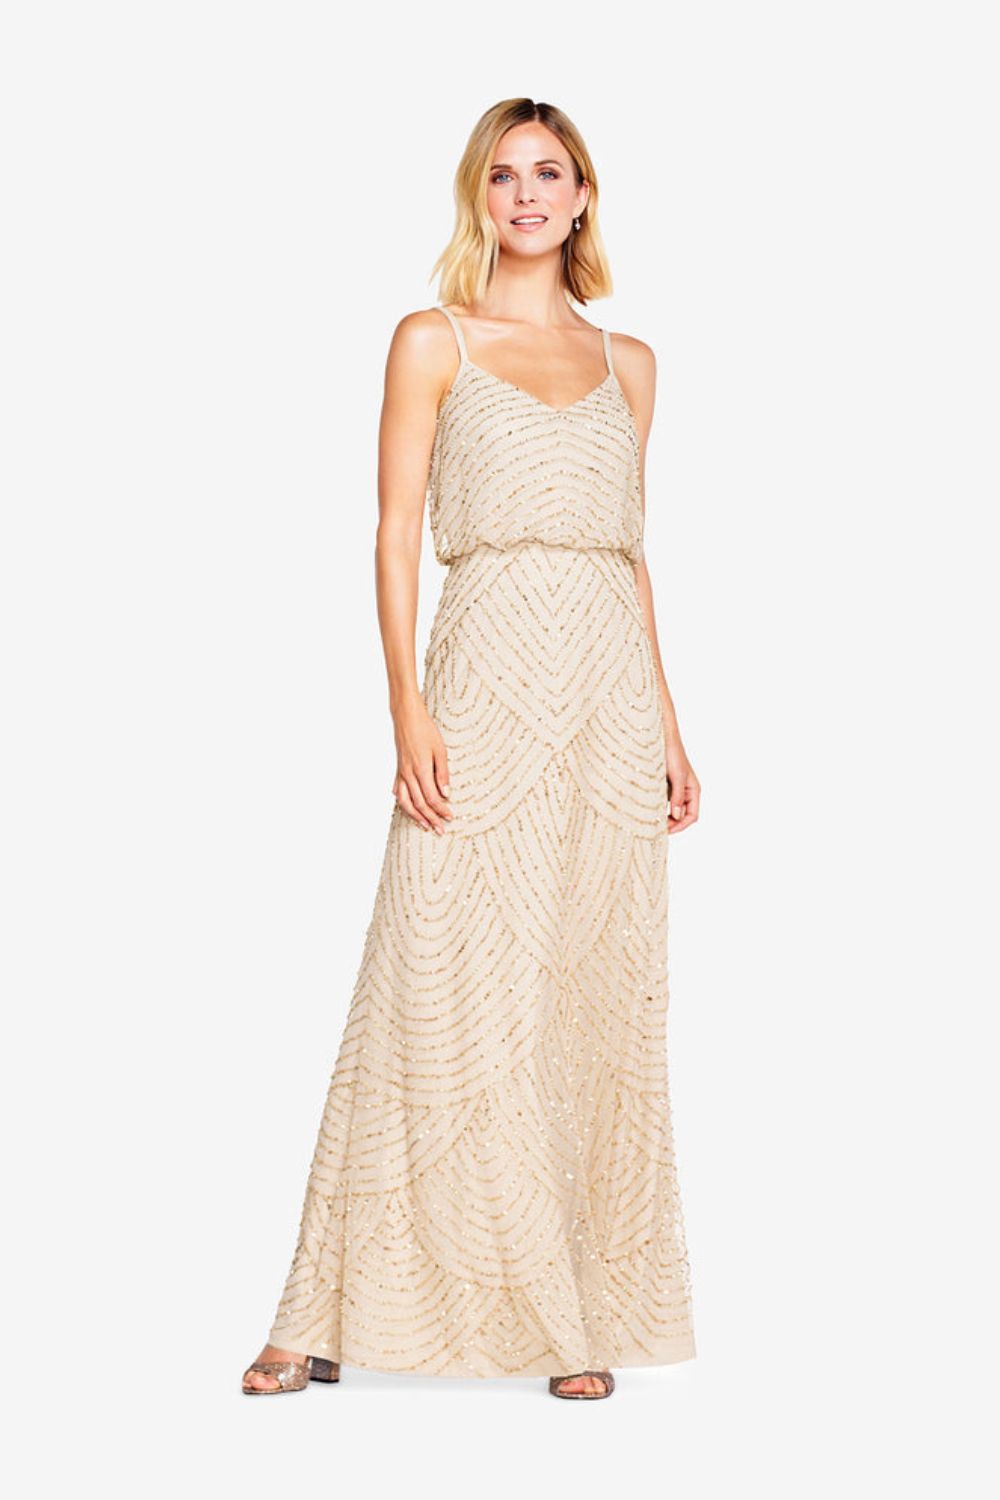 Adrianna Papell | BLOUSON BEADED GOWN | Party Dresses | House of Fraser